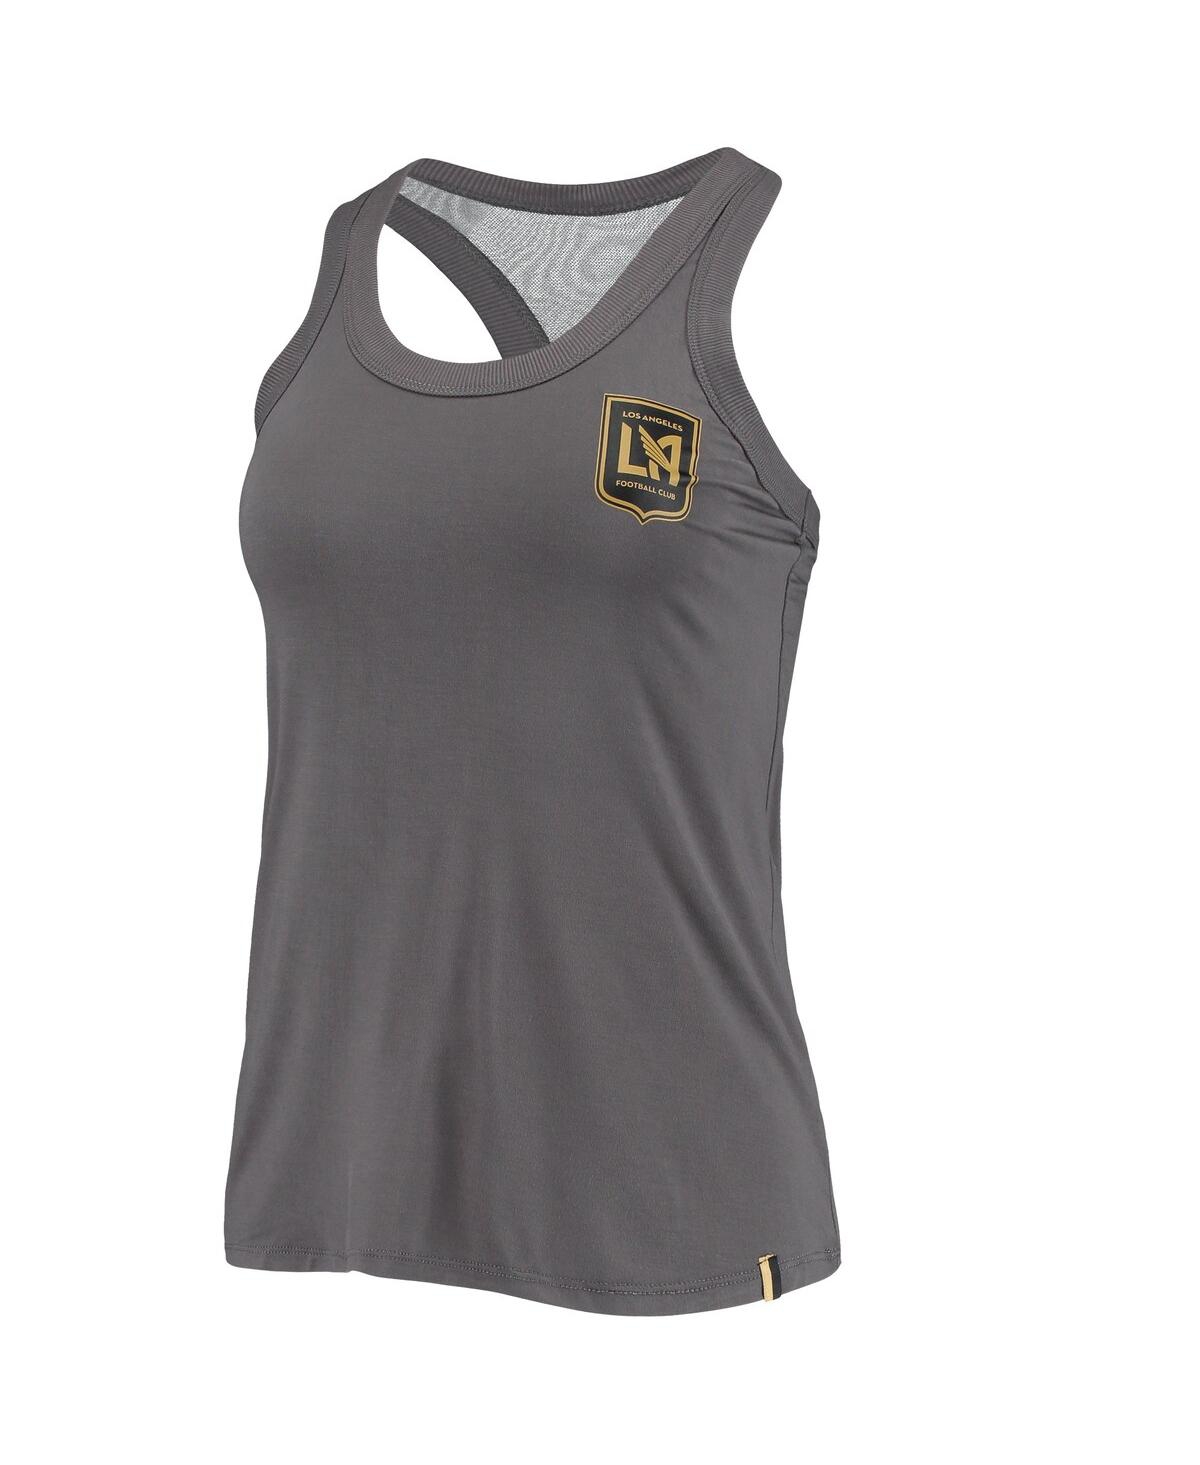 Shop The Wild Collective Women's  Gray Lafc Athleisure Tank Top